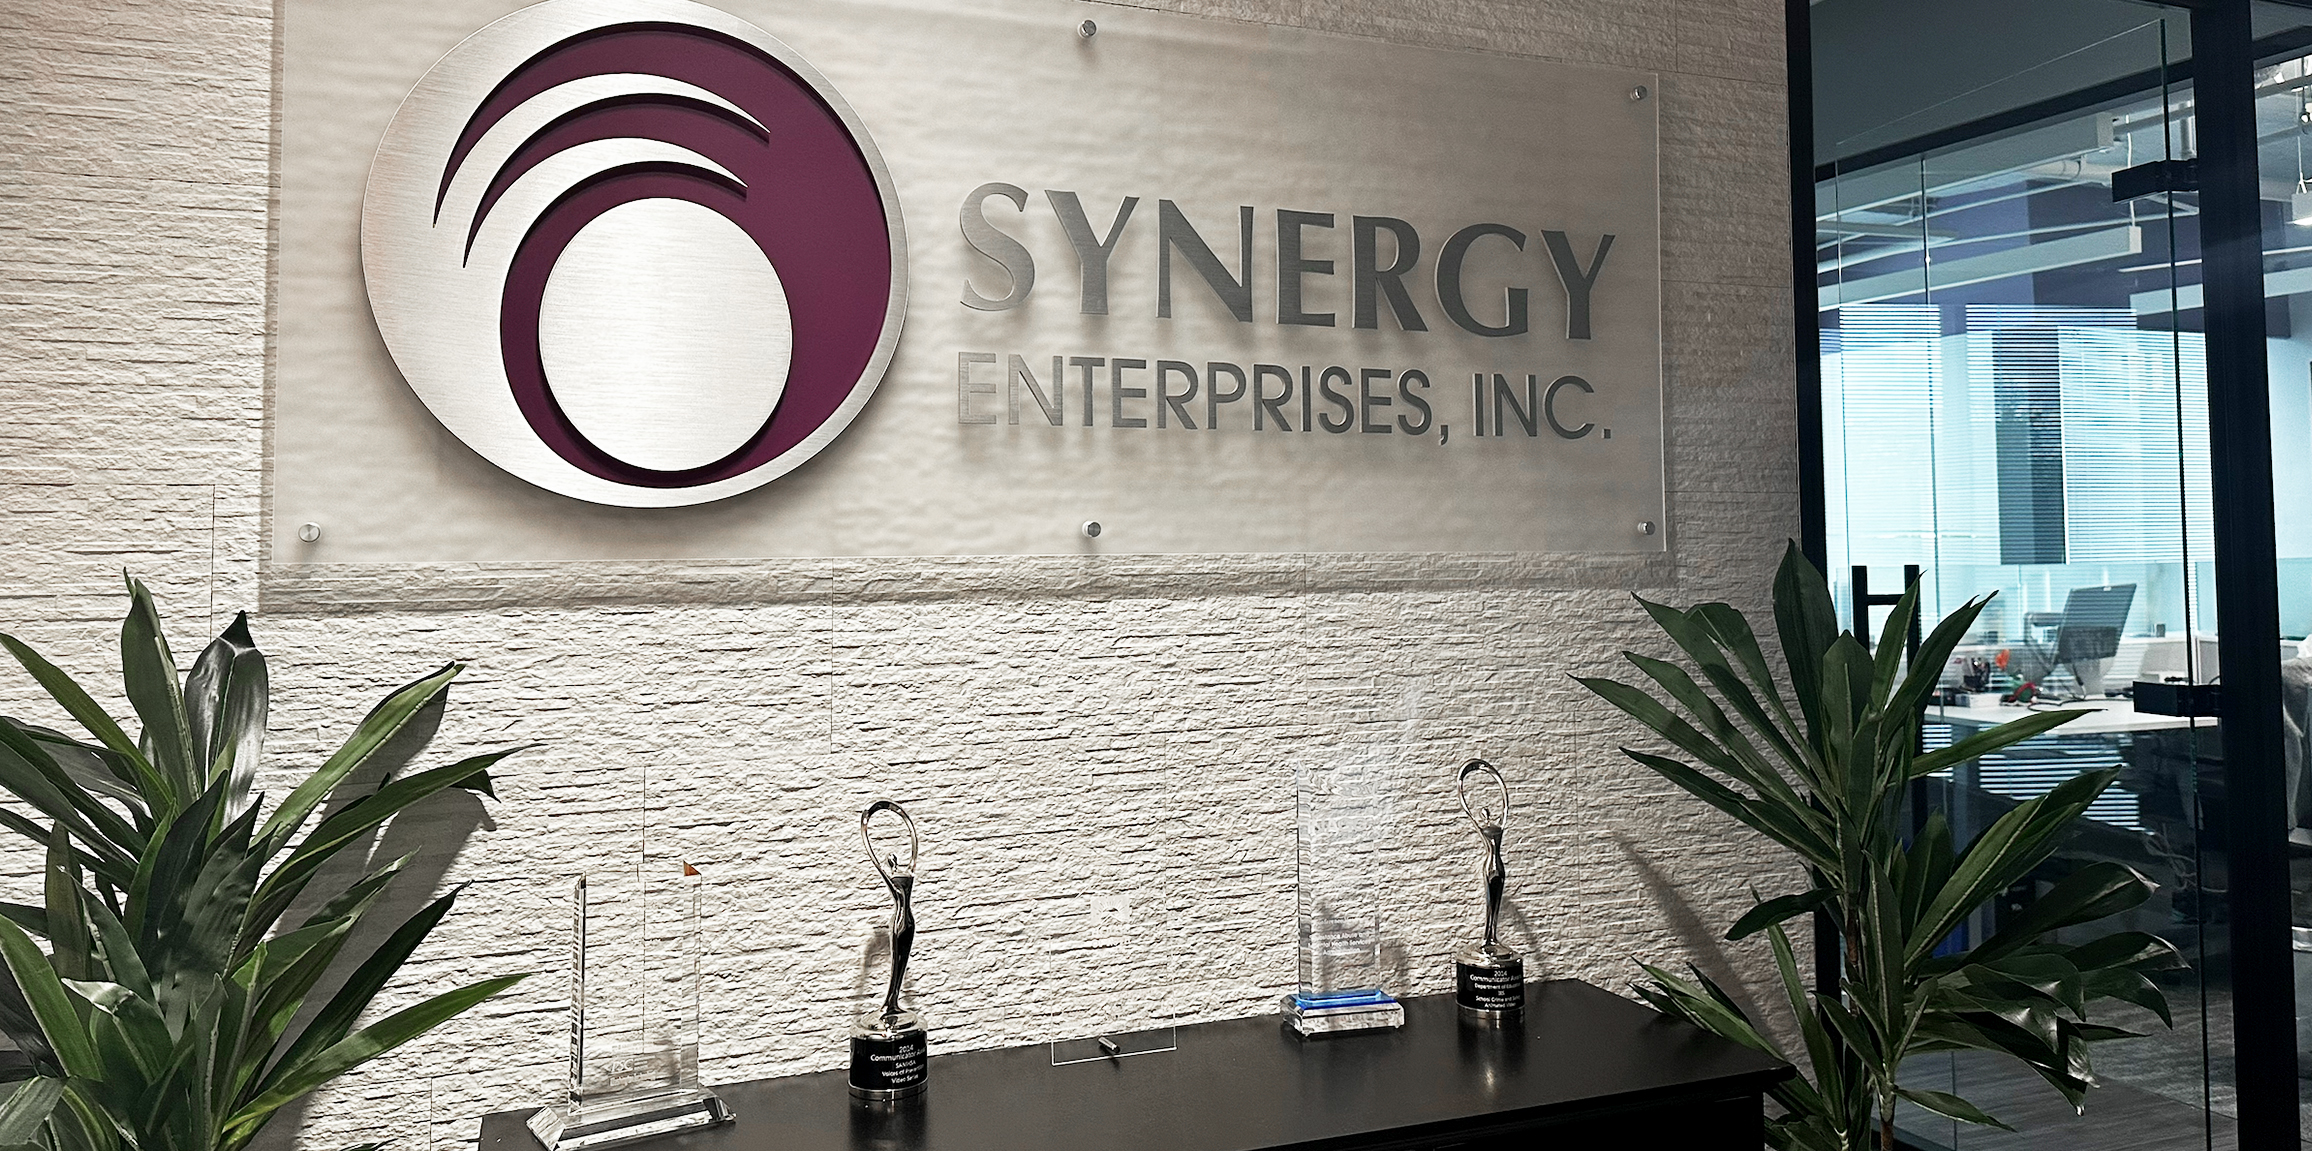 Synergy Award table located at Synergy headquarter office